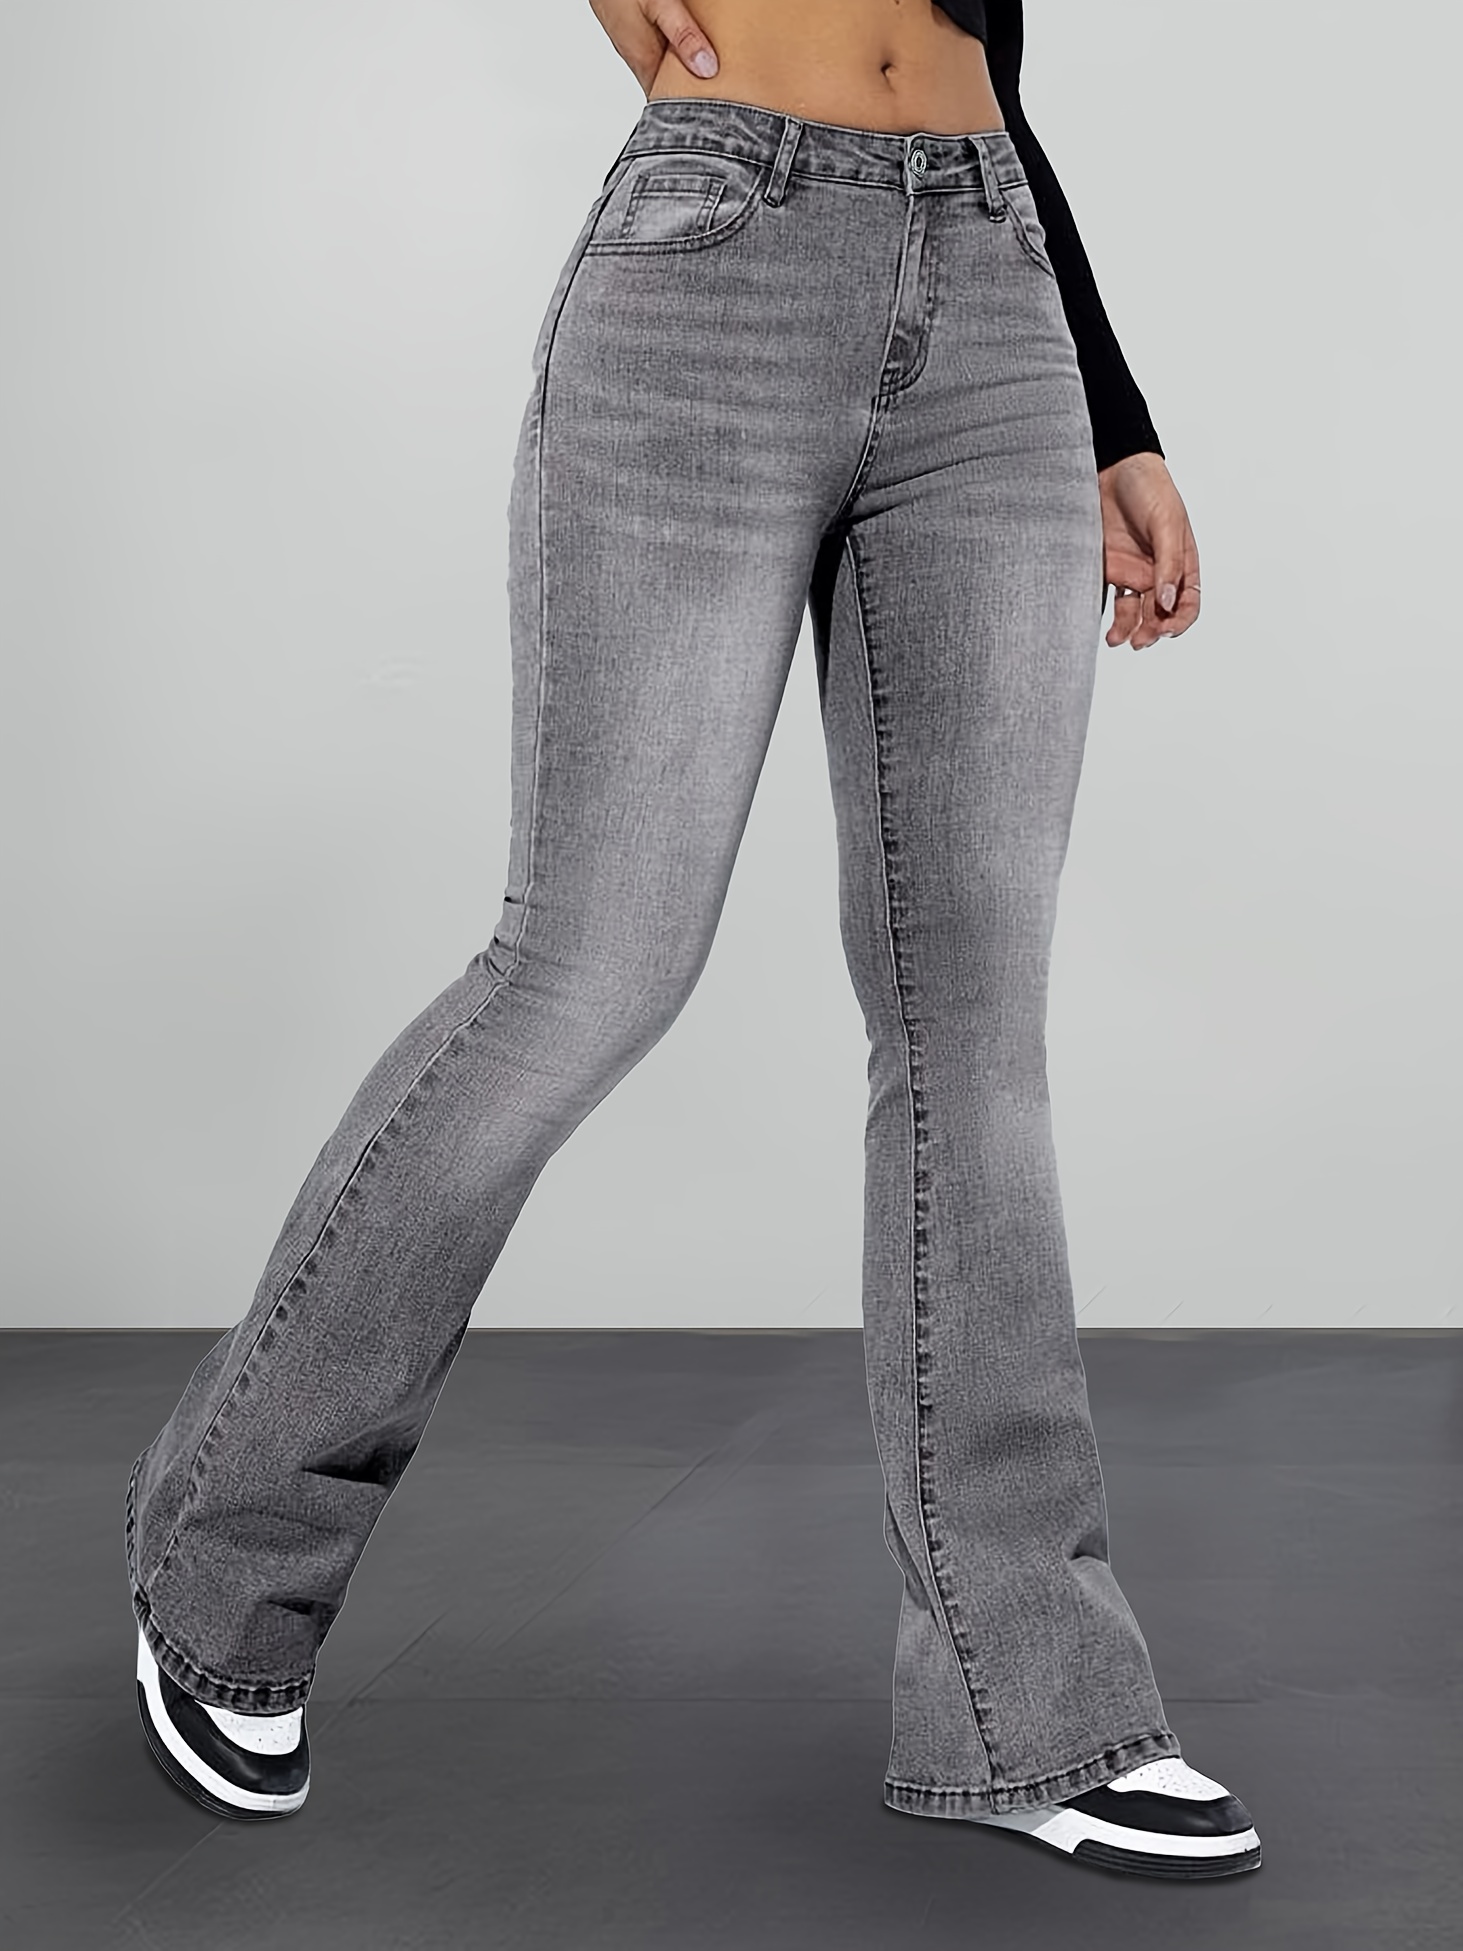 Flare Low Jeans - Gris oscuro - MUJER